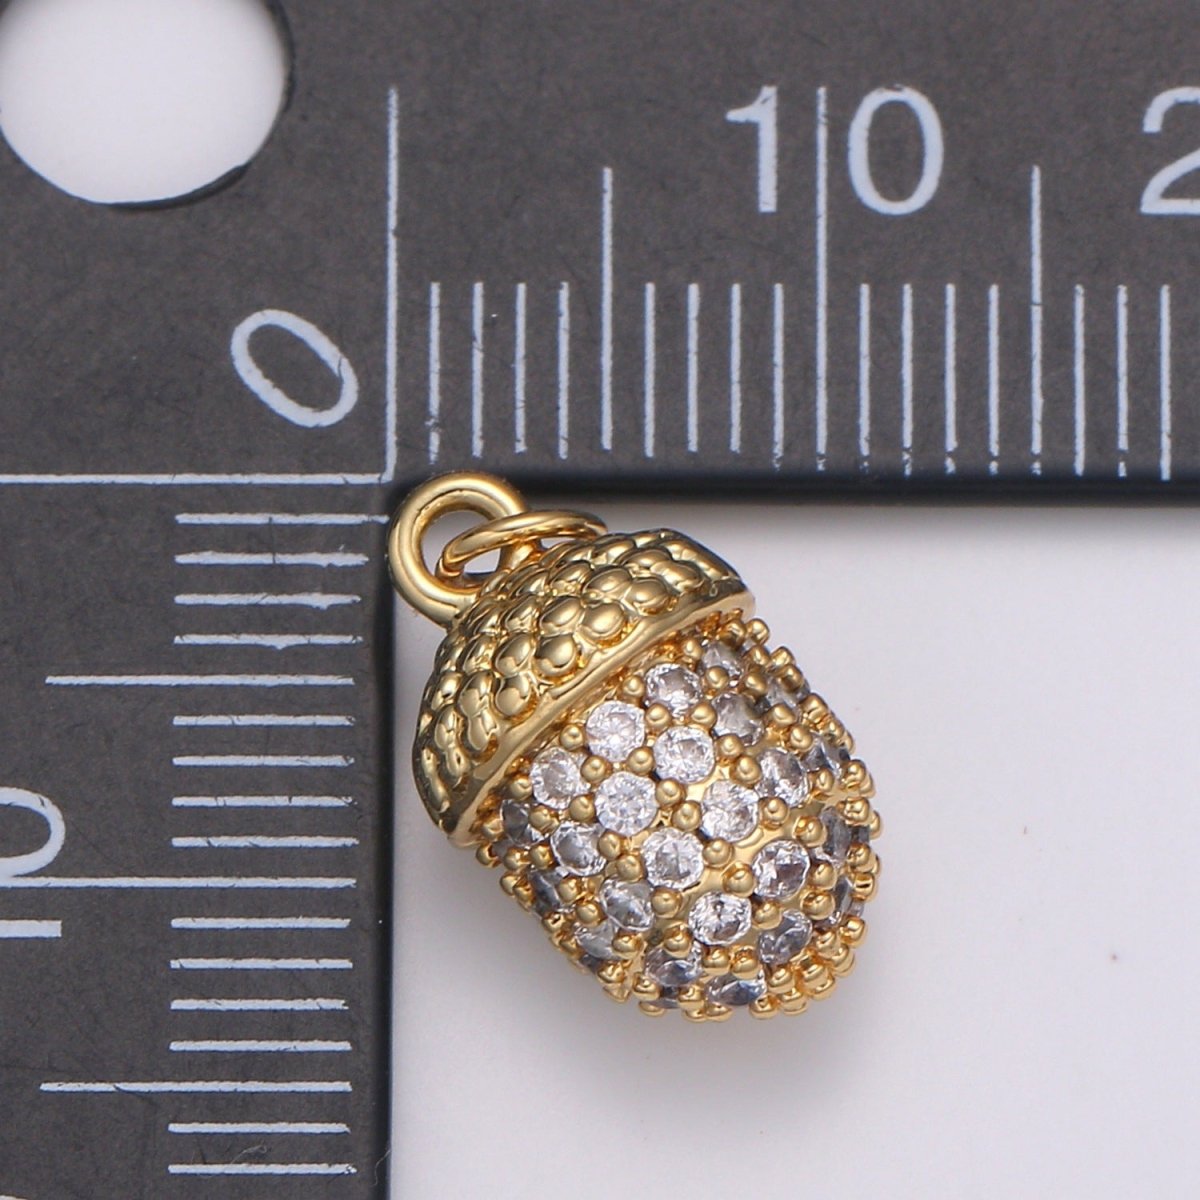 14K Gold Filled Acorn Charm for Minimalist Necklace Jewelry Making supply Micro Pave Acorn Pendant for Bracelet Earring E-185 - DLUXCA